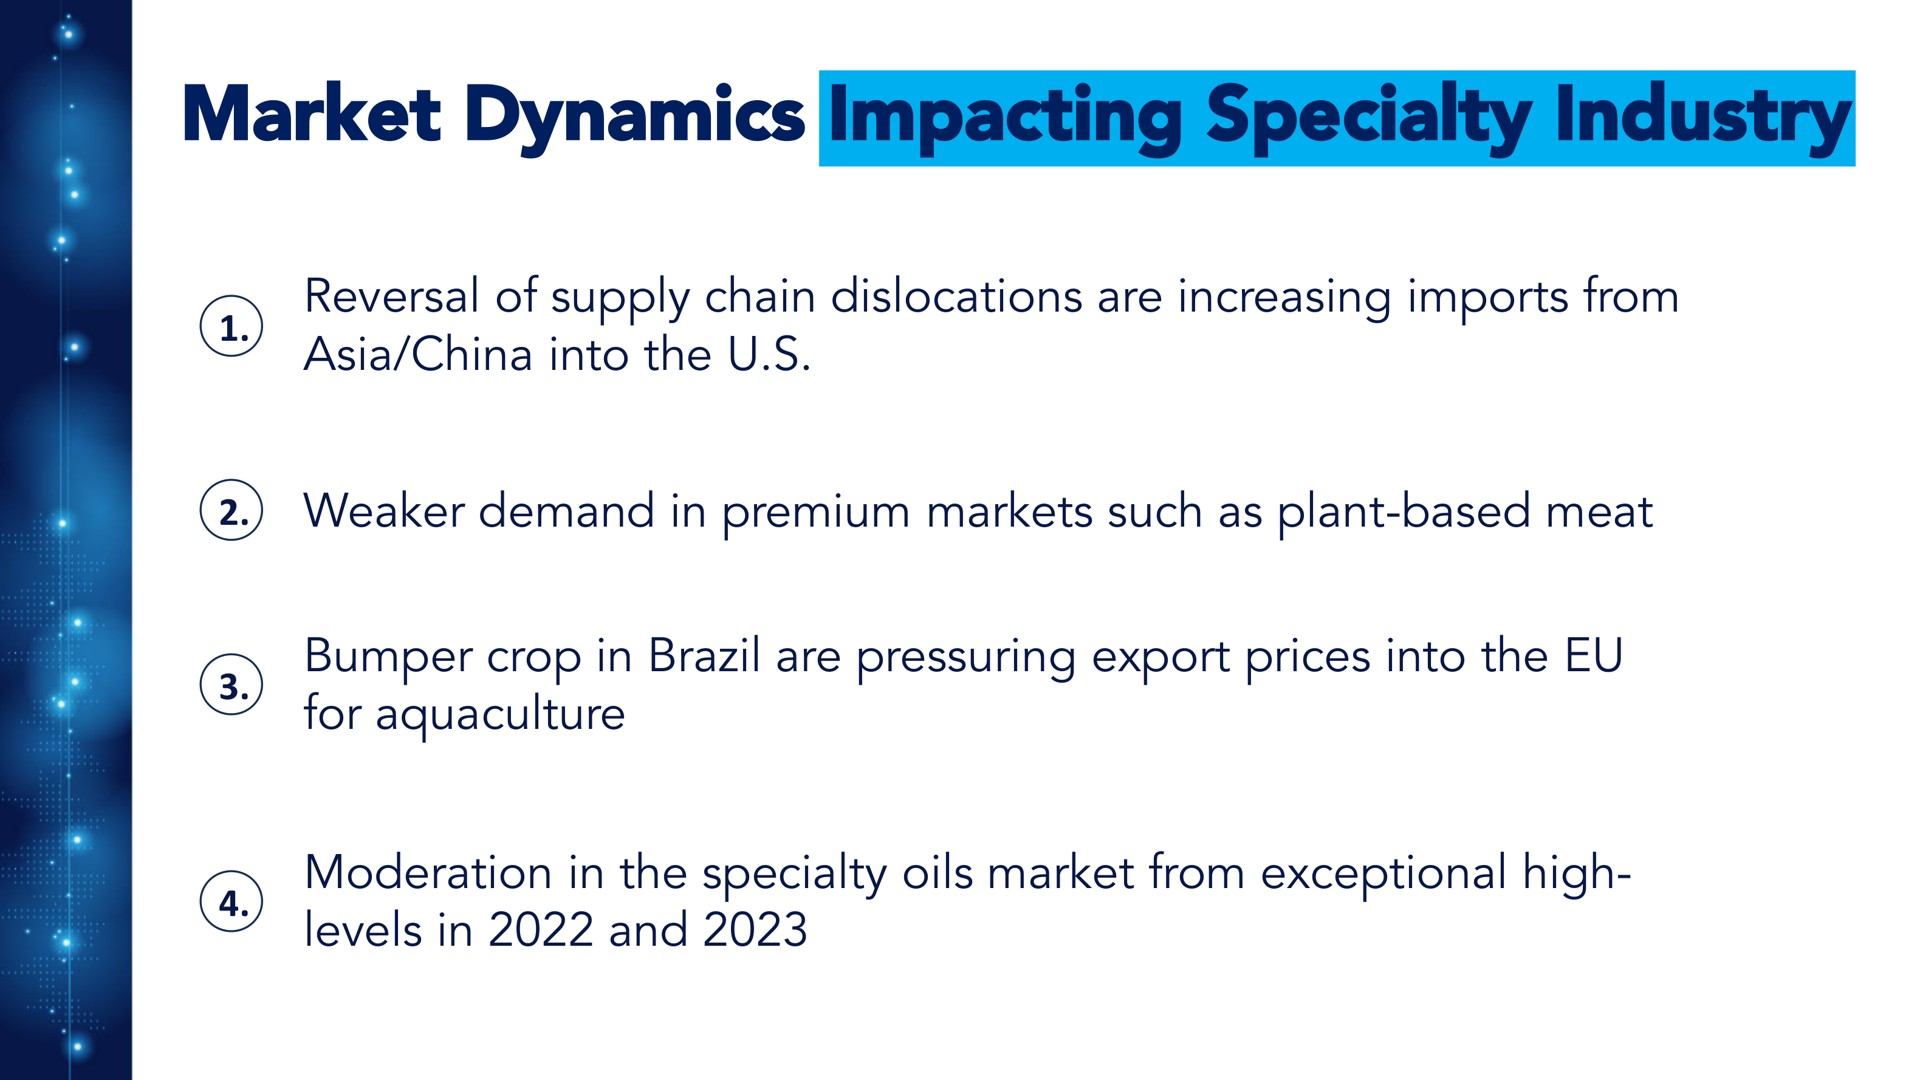 market dynamics impacting specialty industry reversal of supply chain dislocations are increasing imports from china into the demand in premium markets such as plant based meat bumper crop in brazil are pressuring export prices into the for aquaculture moderation in the specialty oils market from exceptional high levels in and | Benson Hill